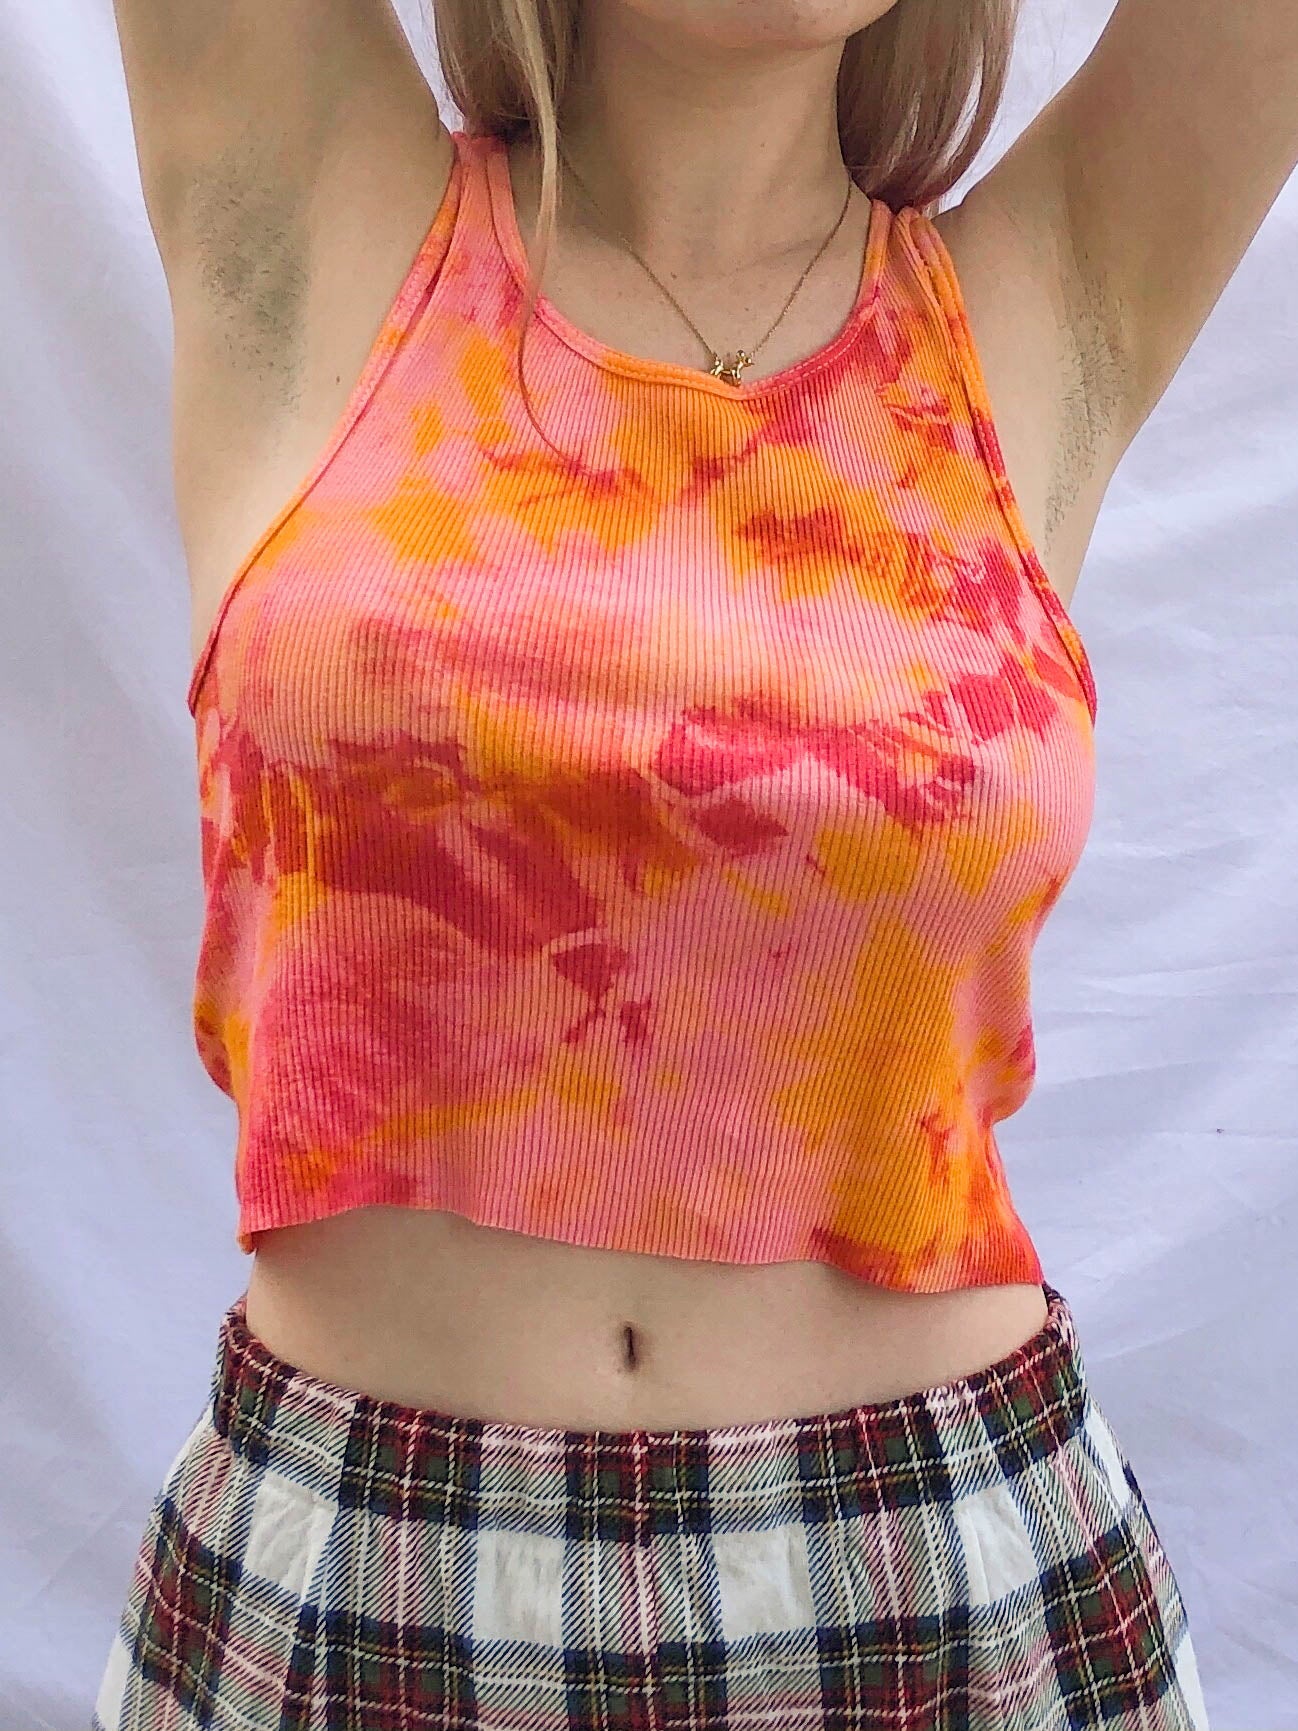 sailor's delight upcycled tank